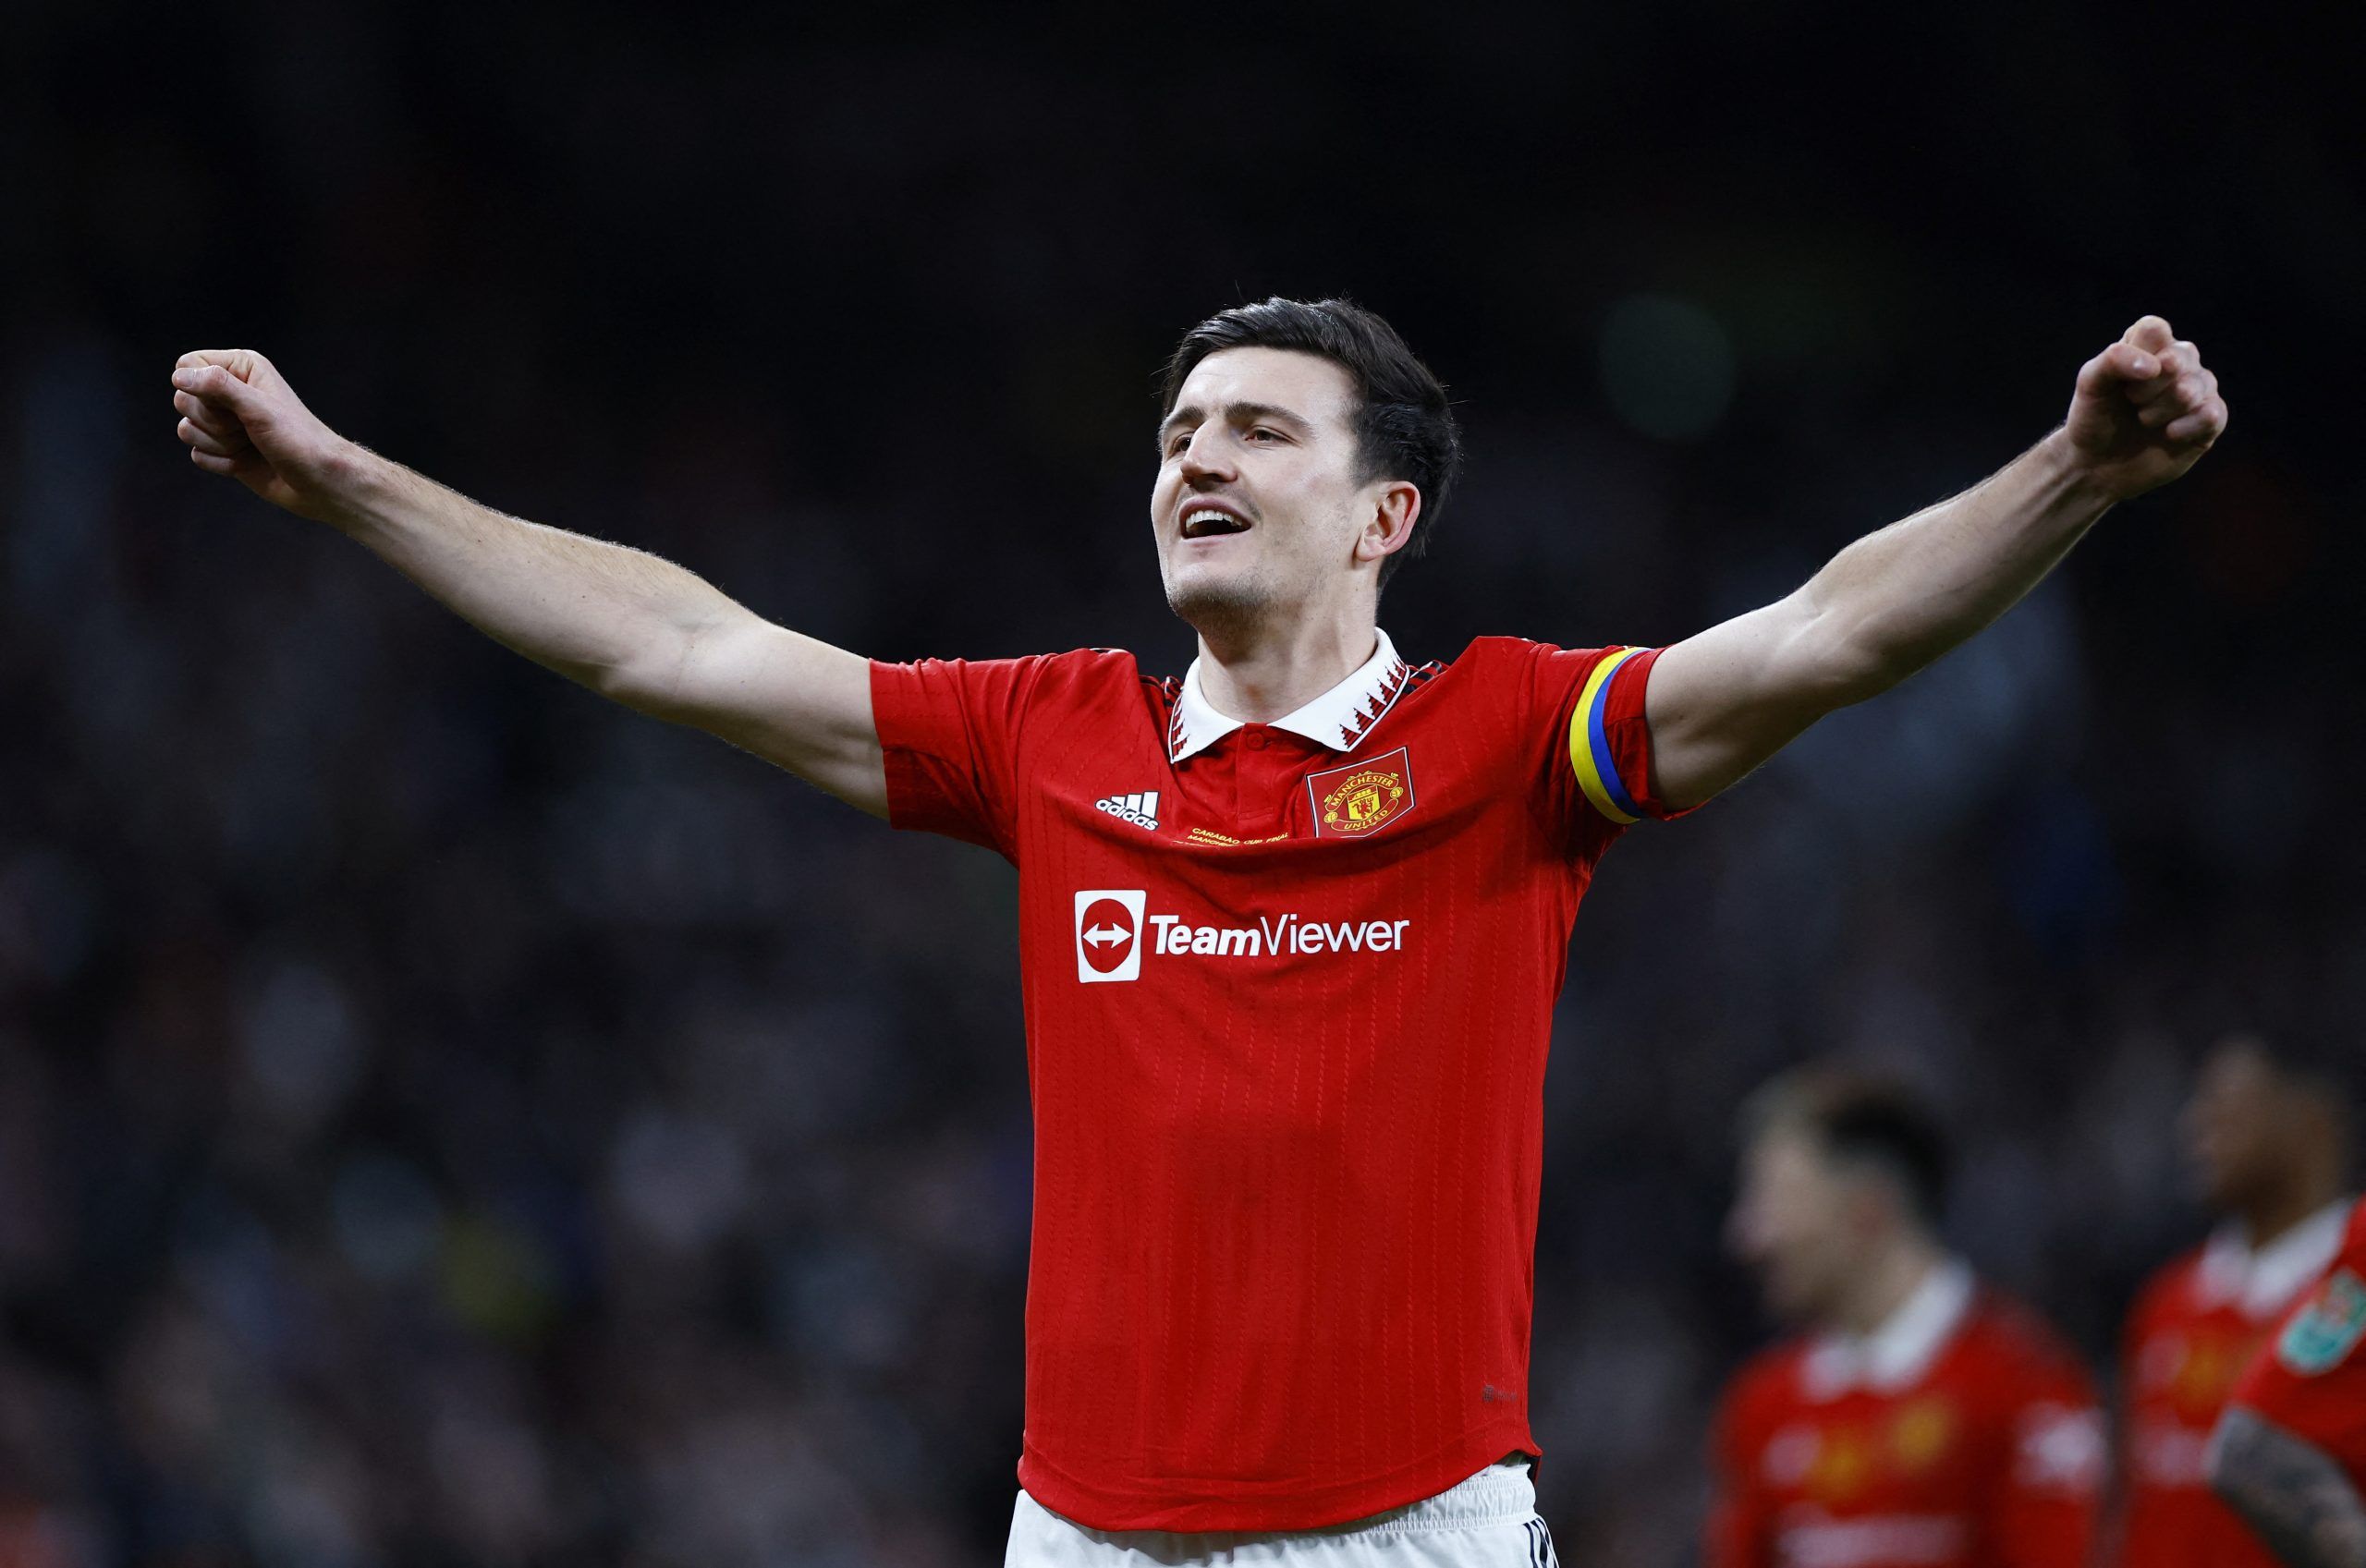 Soccer Football - Carabao Cup - Final - Manchester United v Newcastle United - Wembley Stadium, London, Britain - February 26, 2023  Manchester United's Harry Maguire celebrates after winning the Carabao Cup final Action Images via Reuters/John Sibley EDITORIAL USE ONLY. No use with unauthorized audio, video, data, fixture lists, club/league logos or 'live' services. Online in-match use limited to 75 images, no video emulation. No use in betting, games or single club /league/player publications.